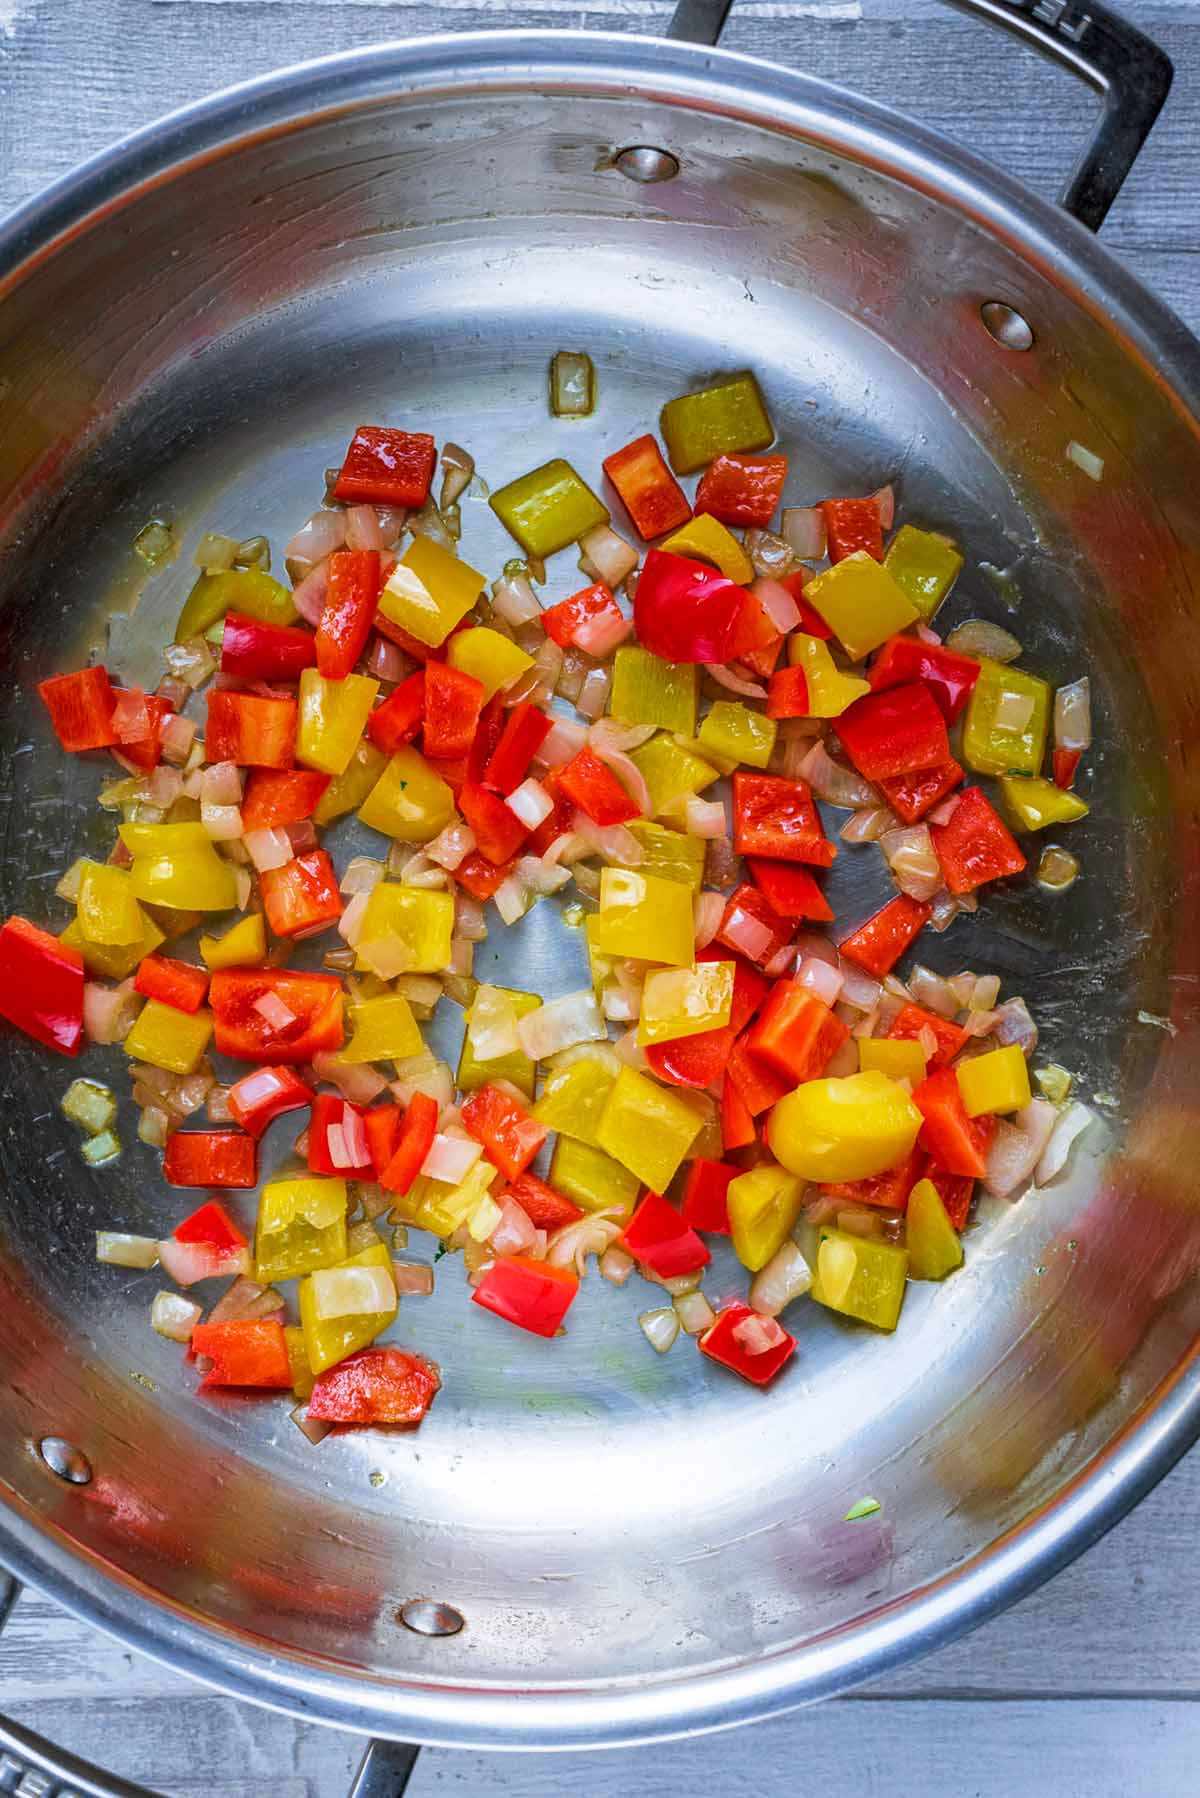 A large silver pan with chopped onion and red and yellow peppers cooking in it.